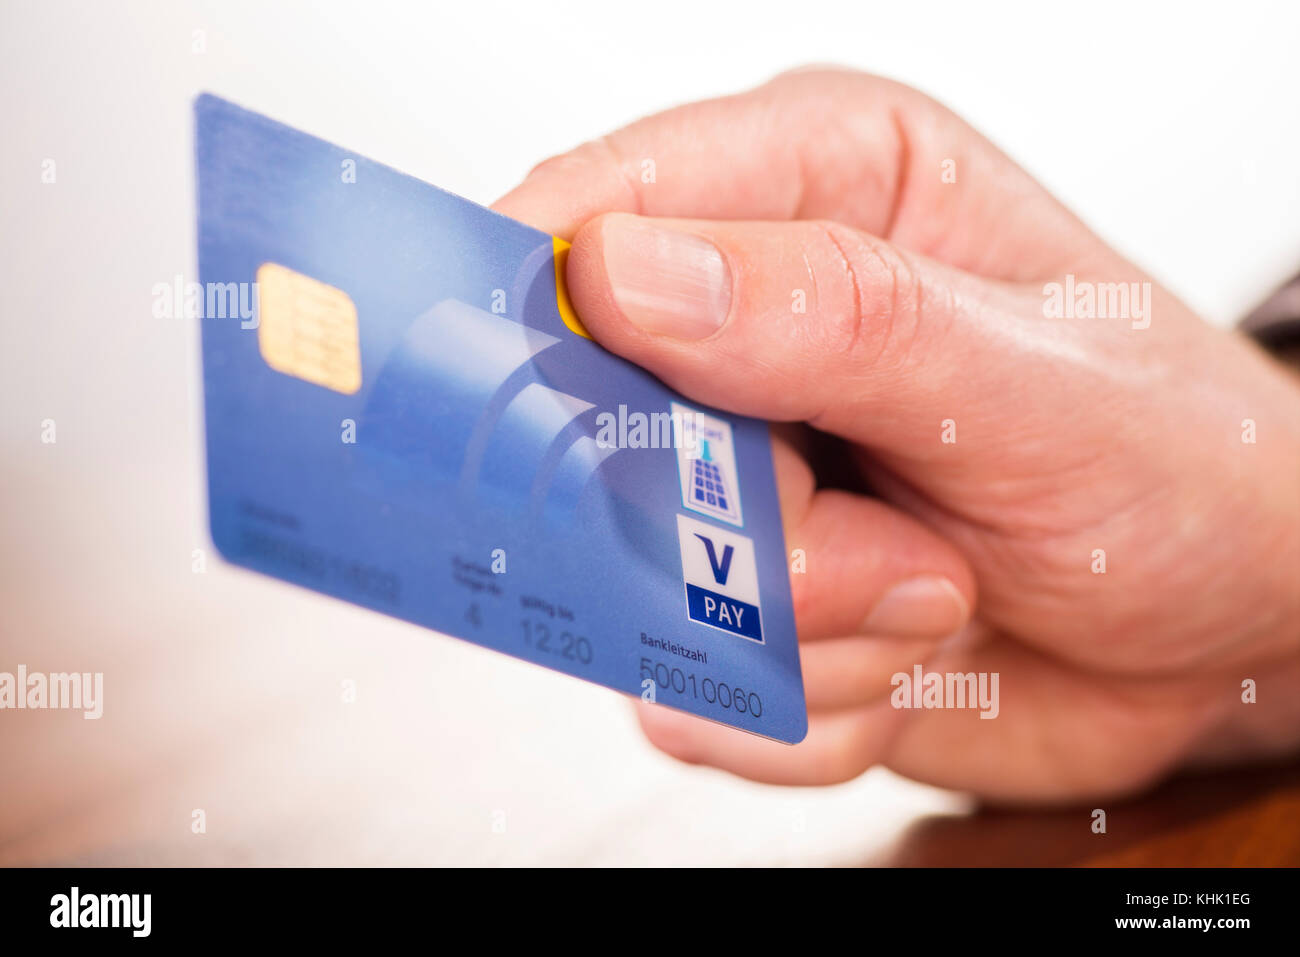 Close-up of a hand with girocard of Postbank and V Pay logo Stock Photo